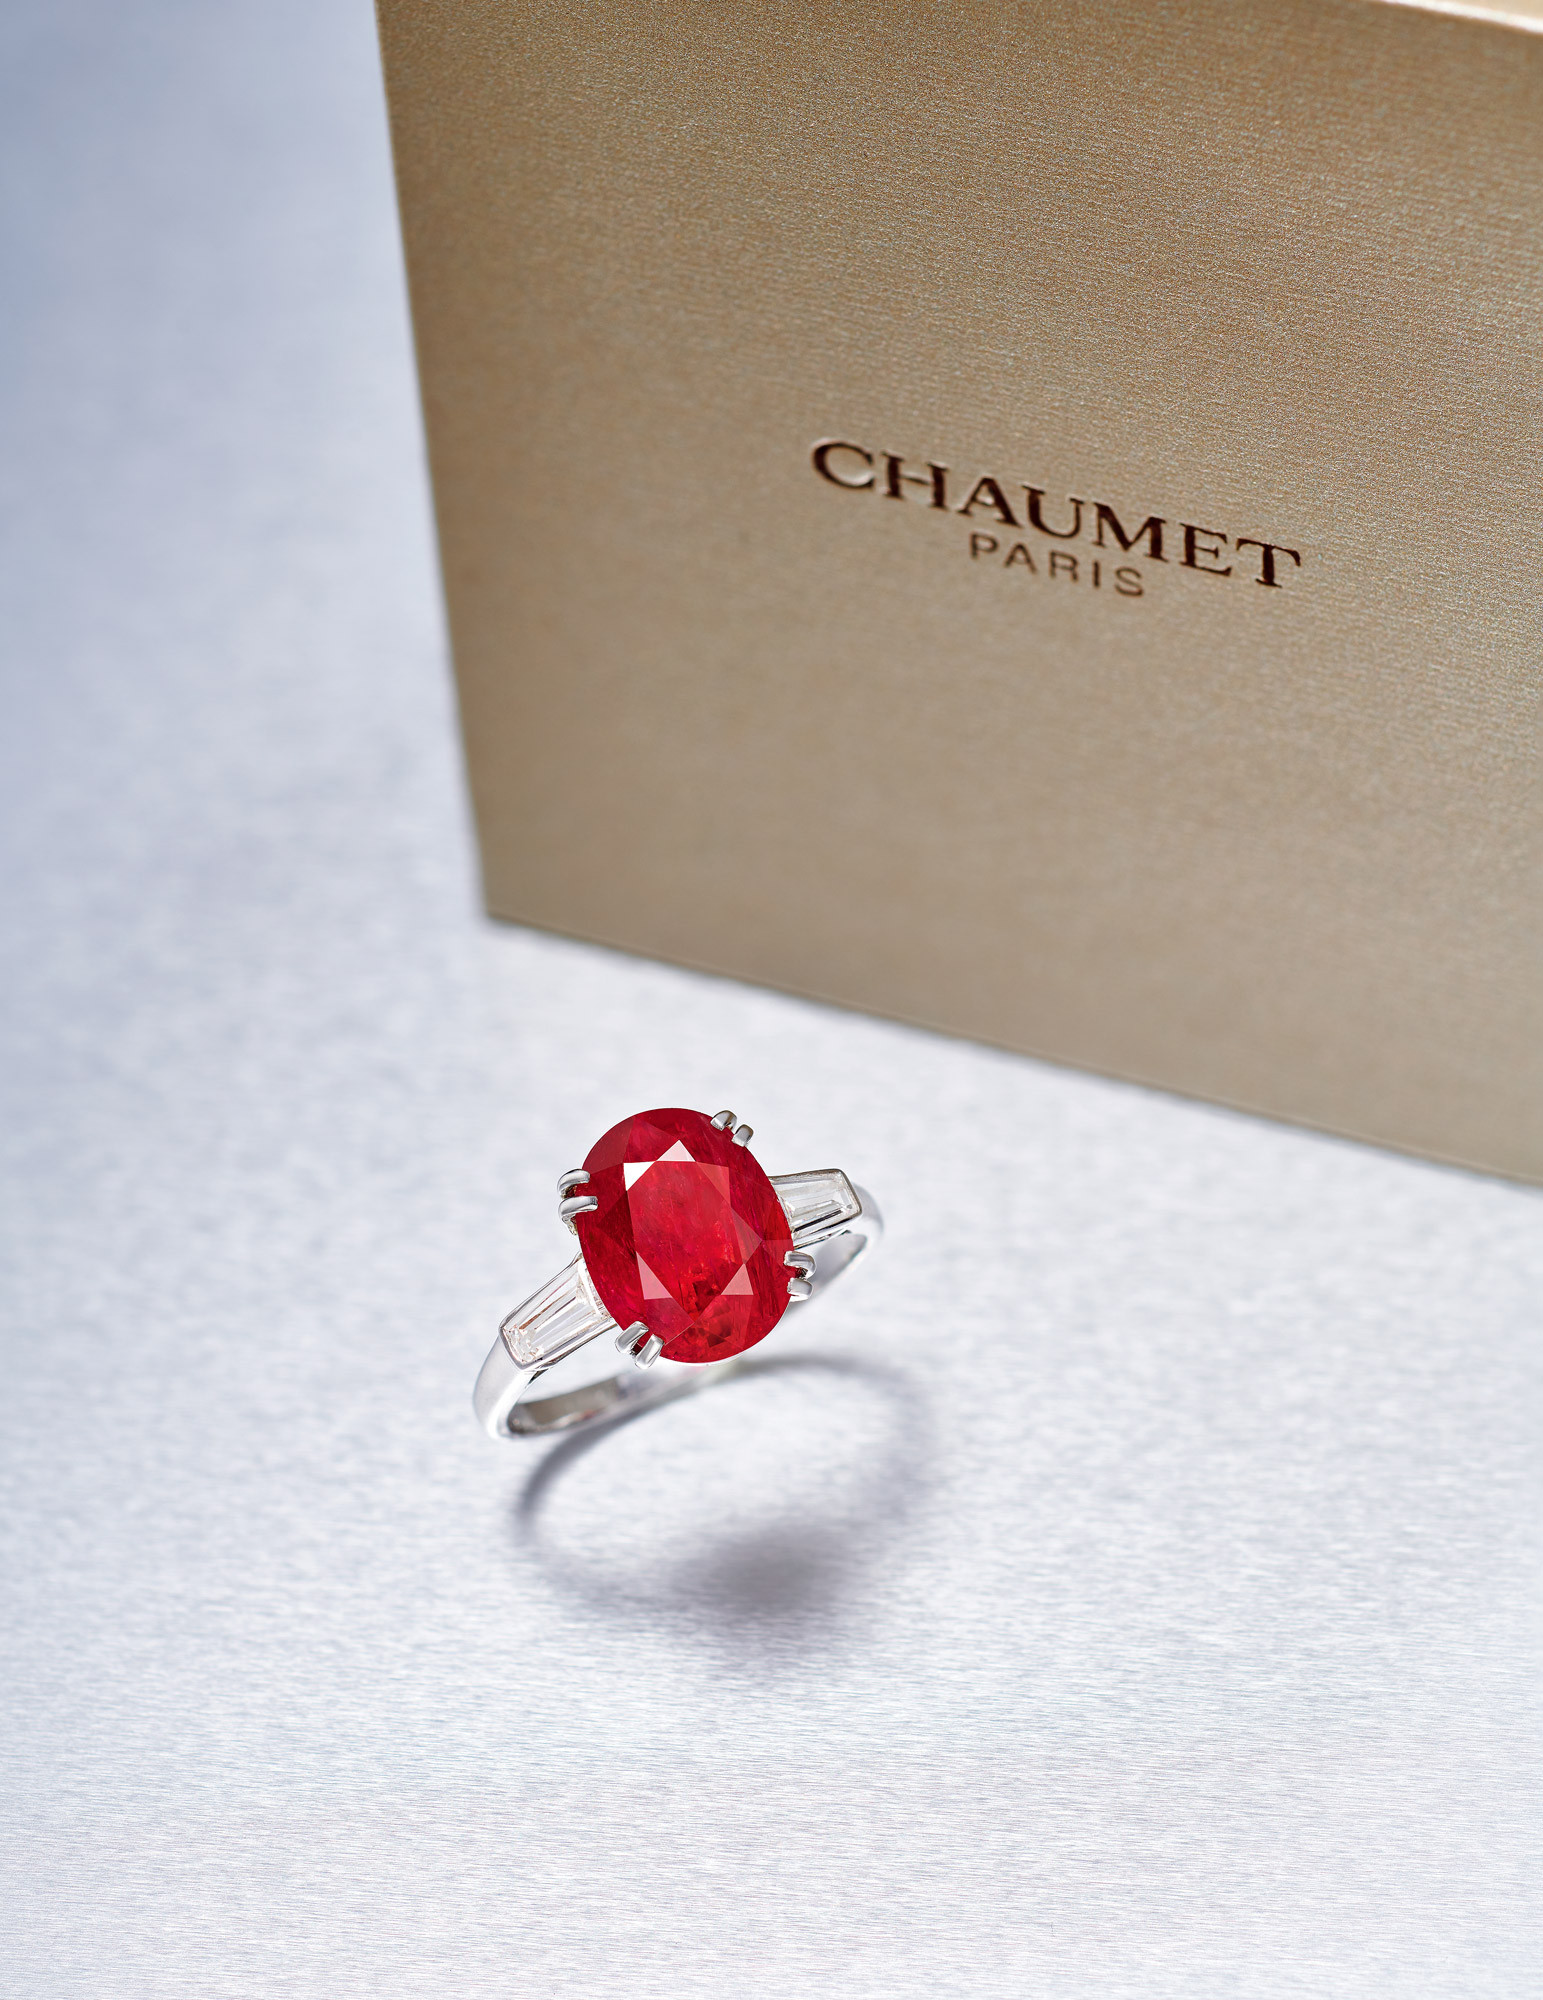 A 5.33 CARAT BURMESE MOGOK ’PIGEON’S BLOOD’ RUBY AND DIAMOND RING,BY CHAUMET